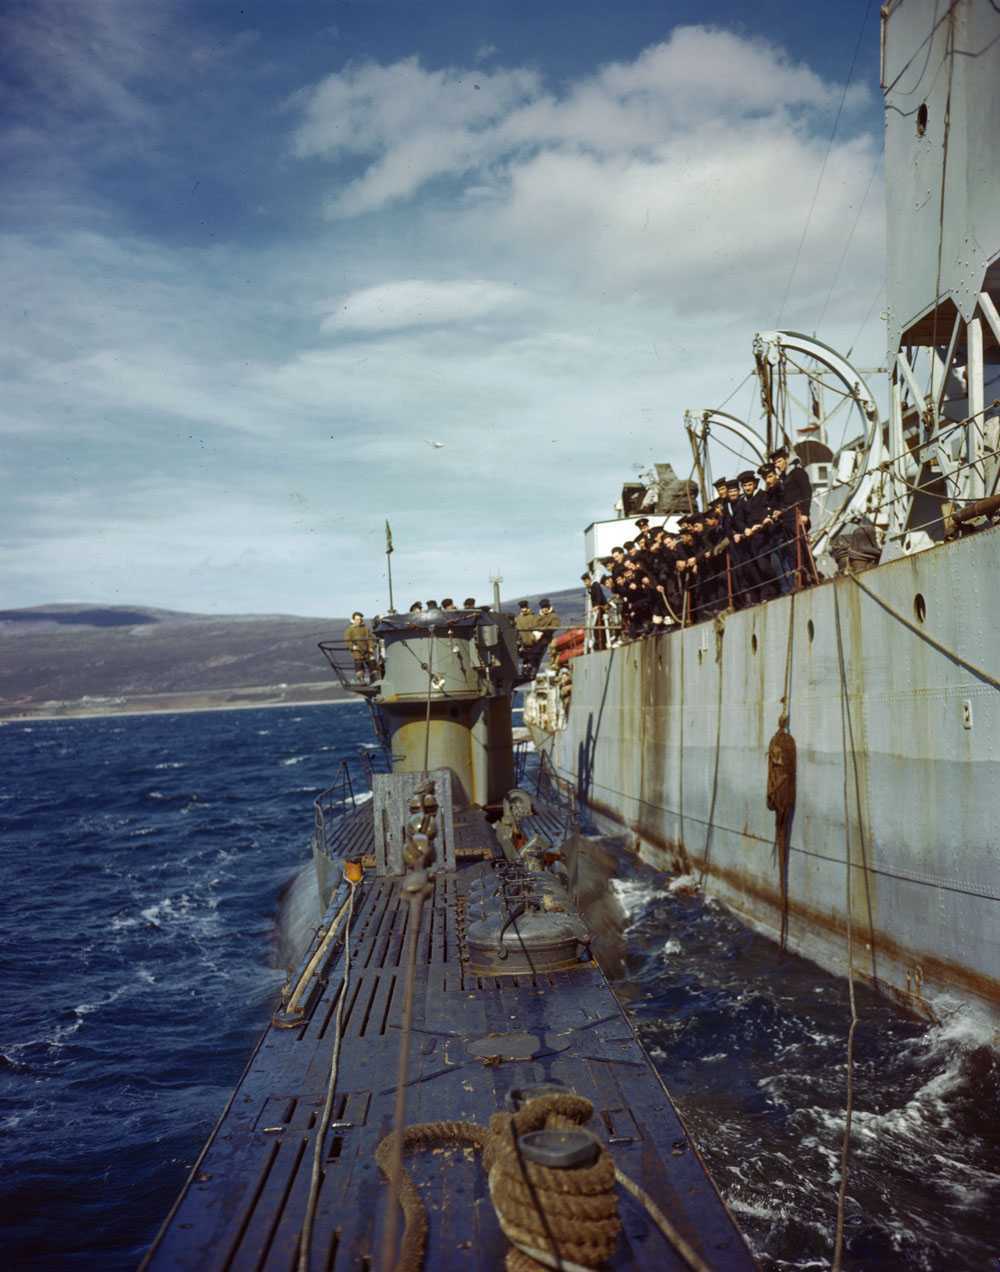 Colour image. The side of a large ship is shown, Canadian sailors lean over the rail on the side. Attached to the boat by ropes is a barely-surfaced submarine; German military personnel are standing on top of it.